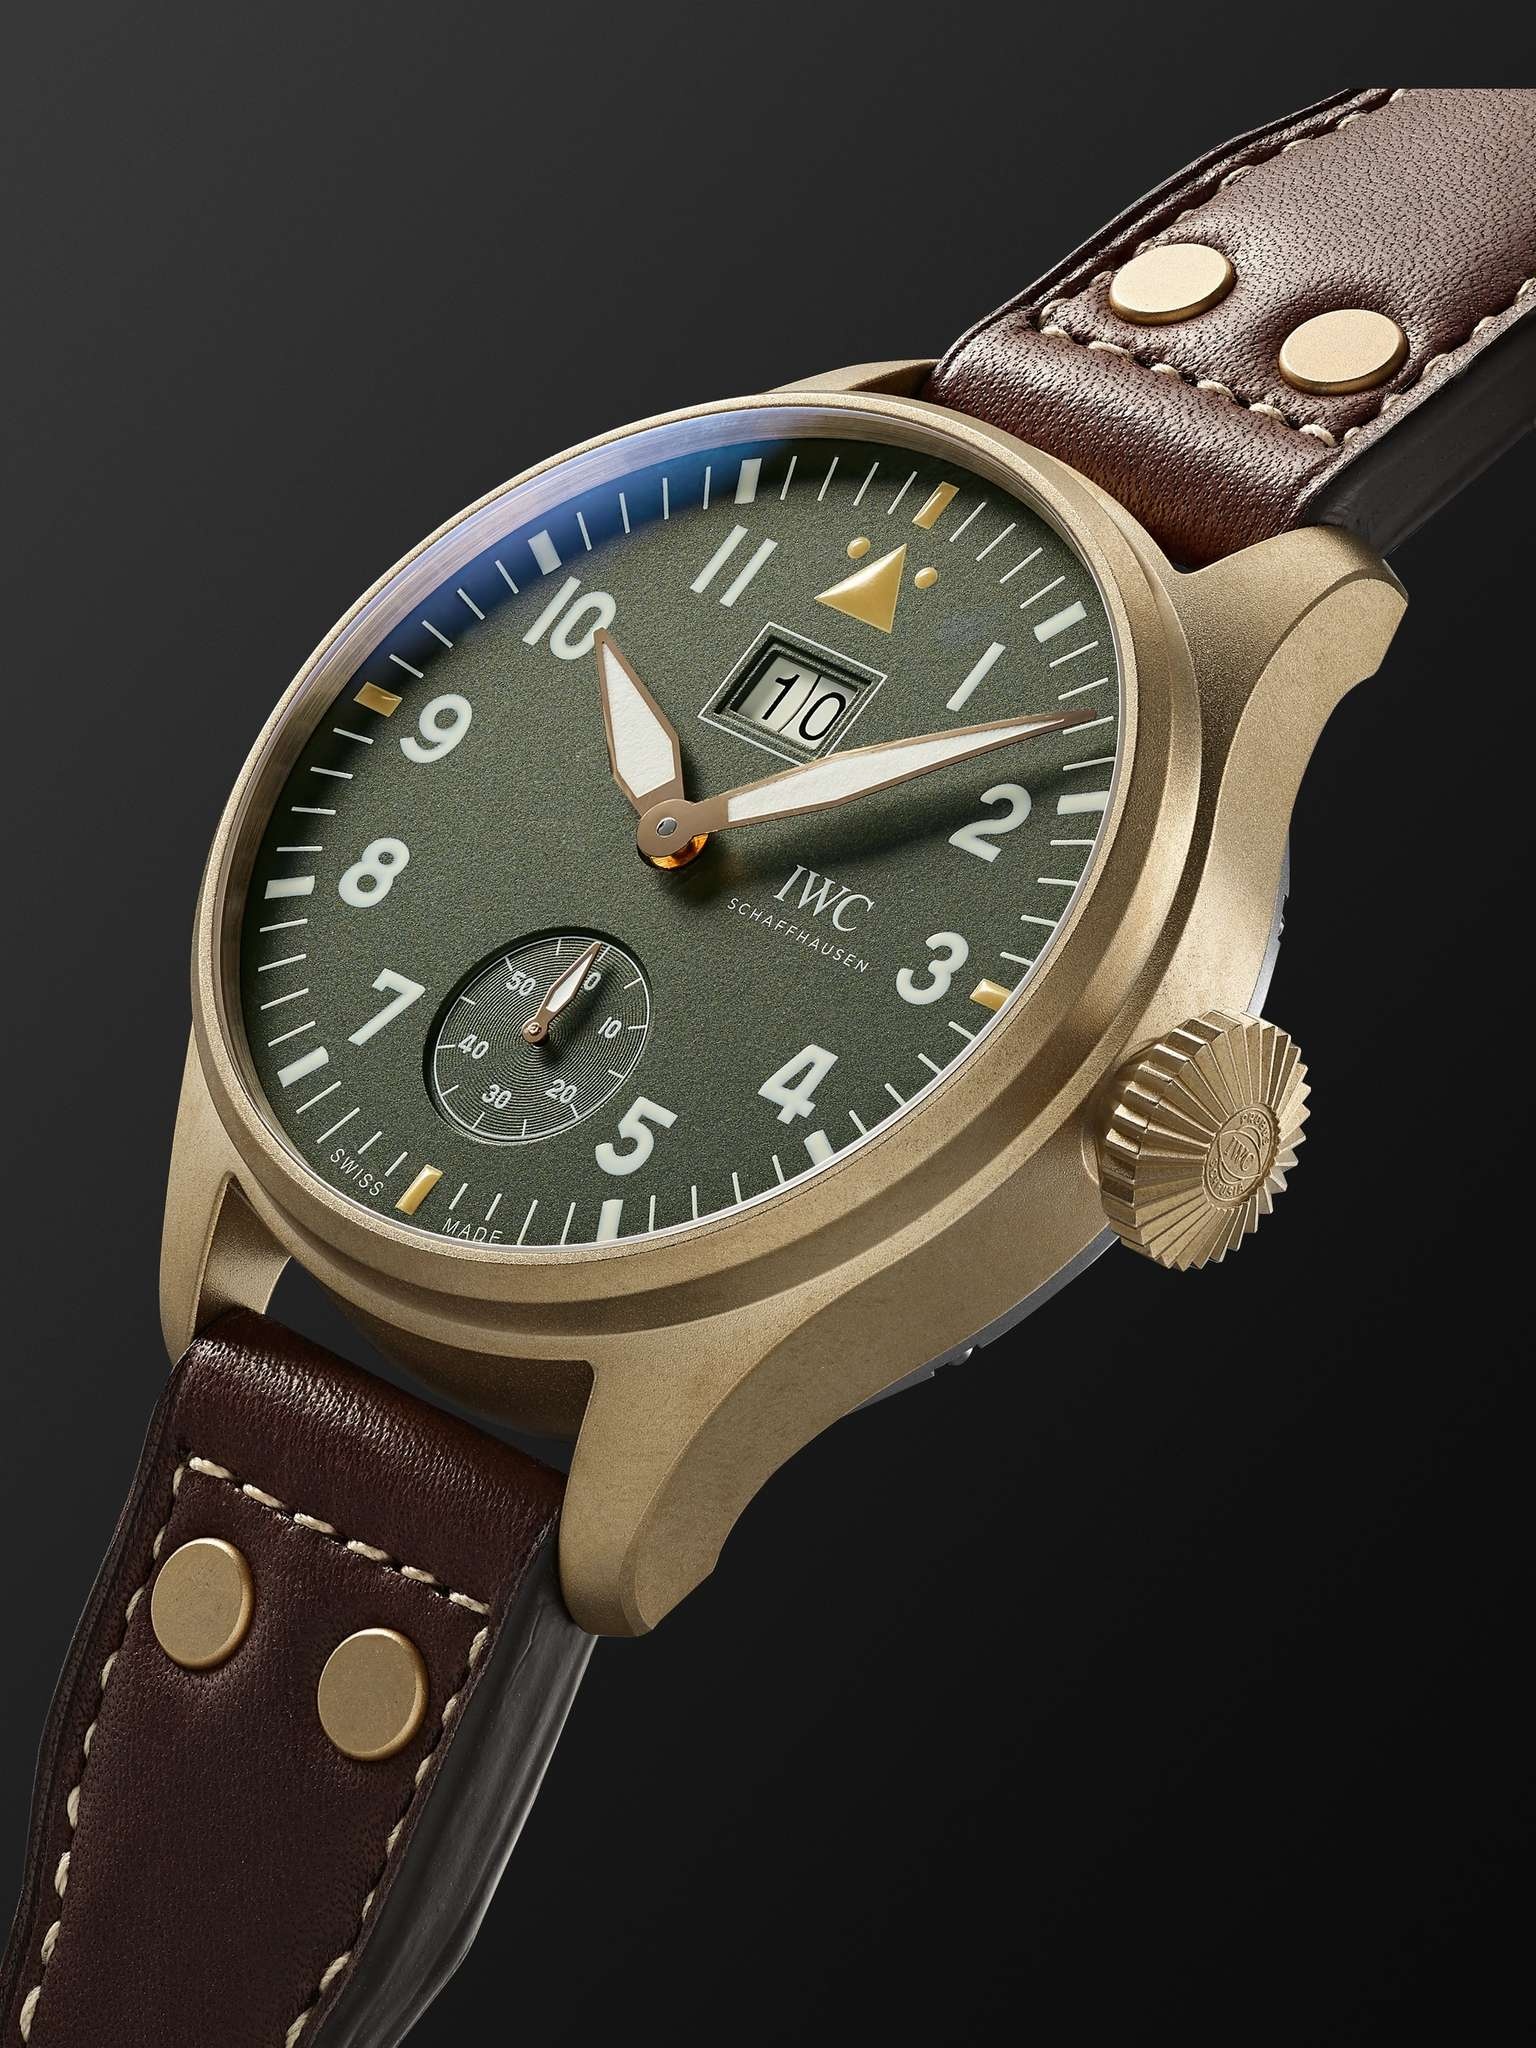 Big Pilot's Big Date Spitfire ‘Mission Accomplished’ Limited Edition Hand-Wound 46.2mm Bronze and Le - 4